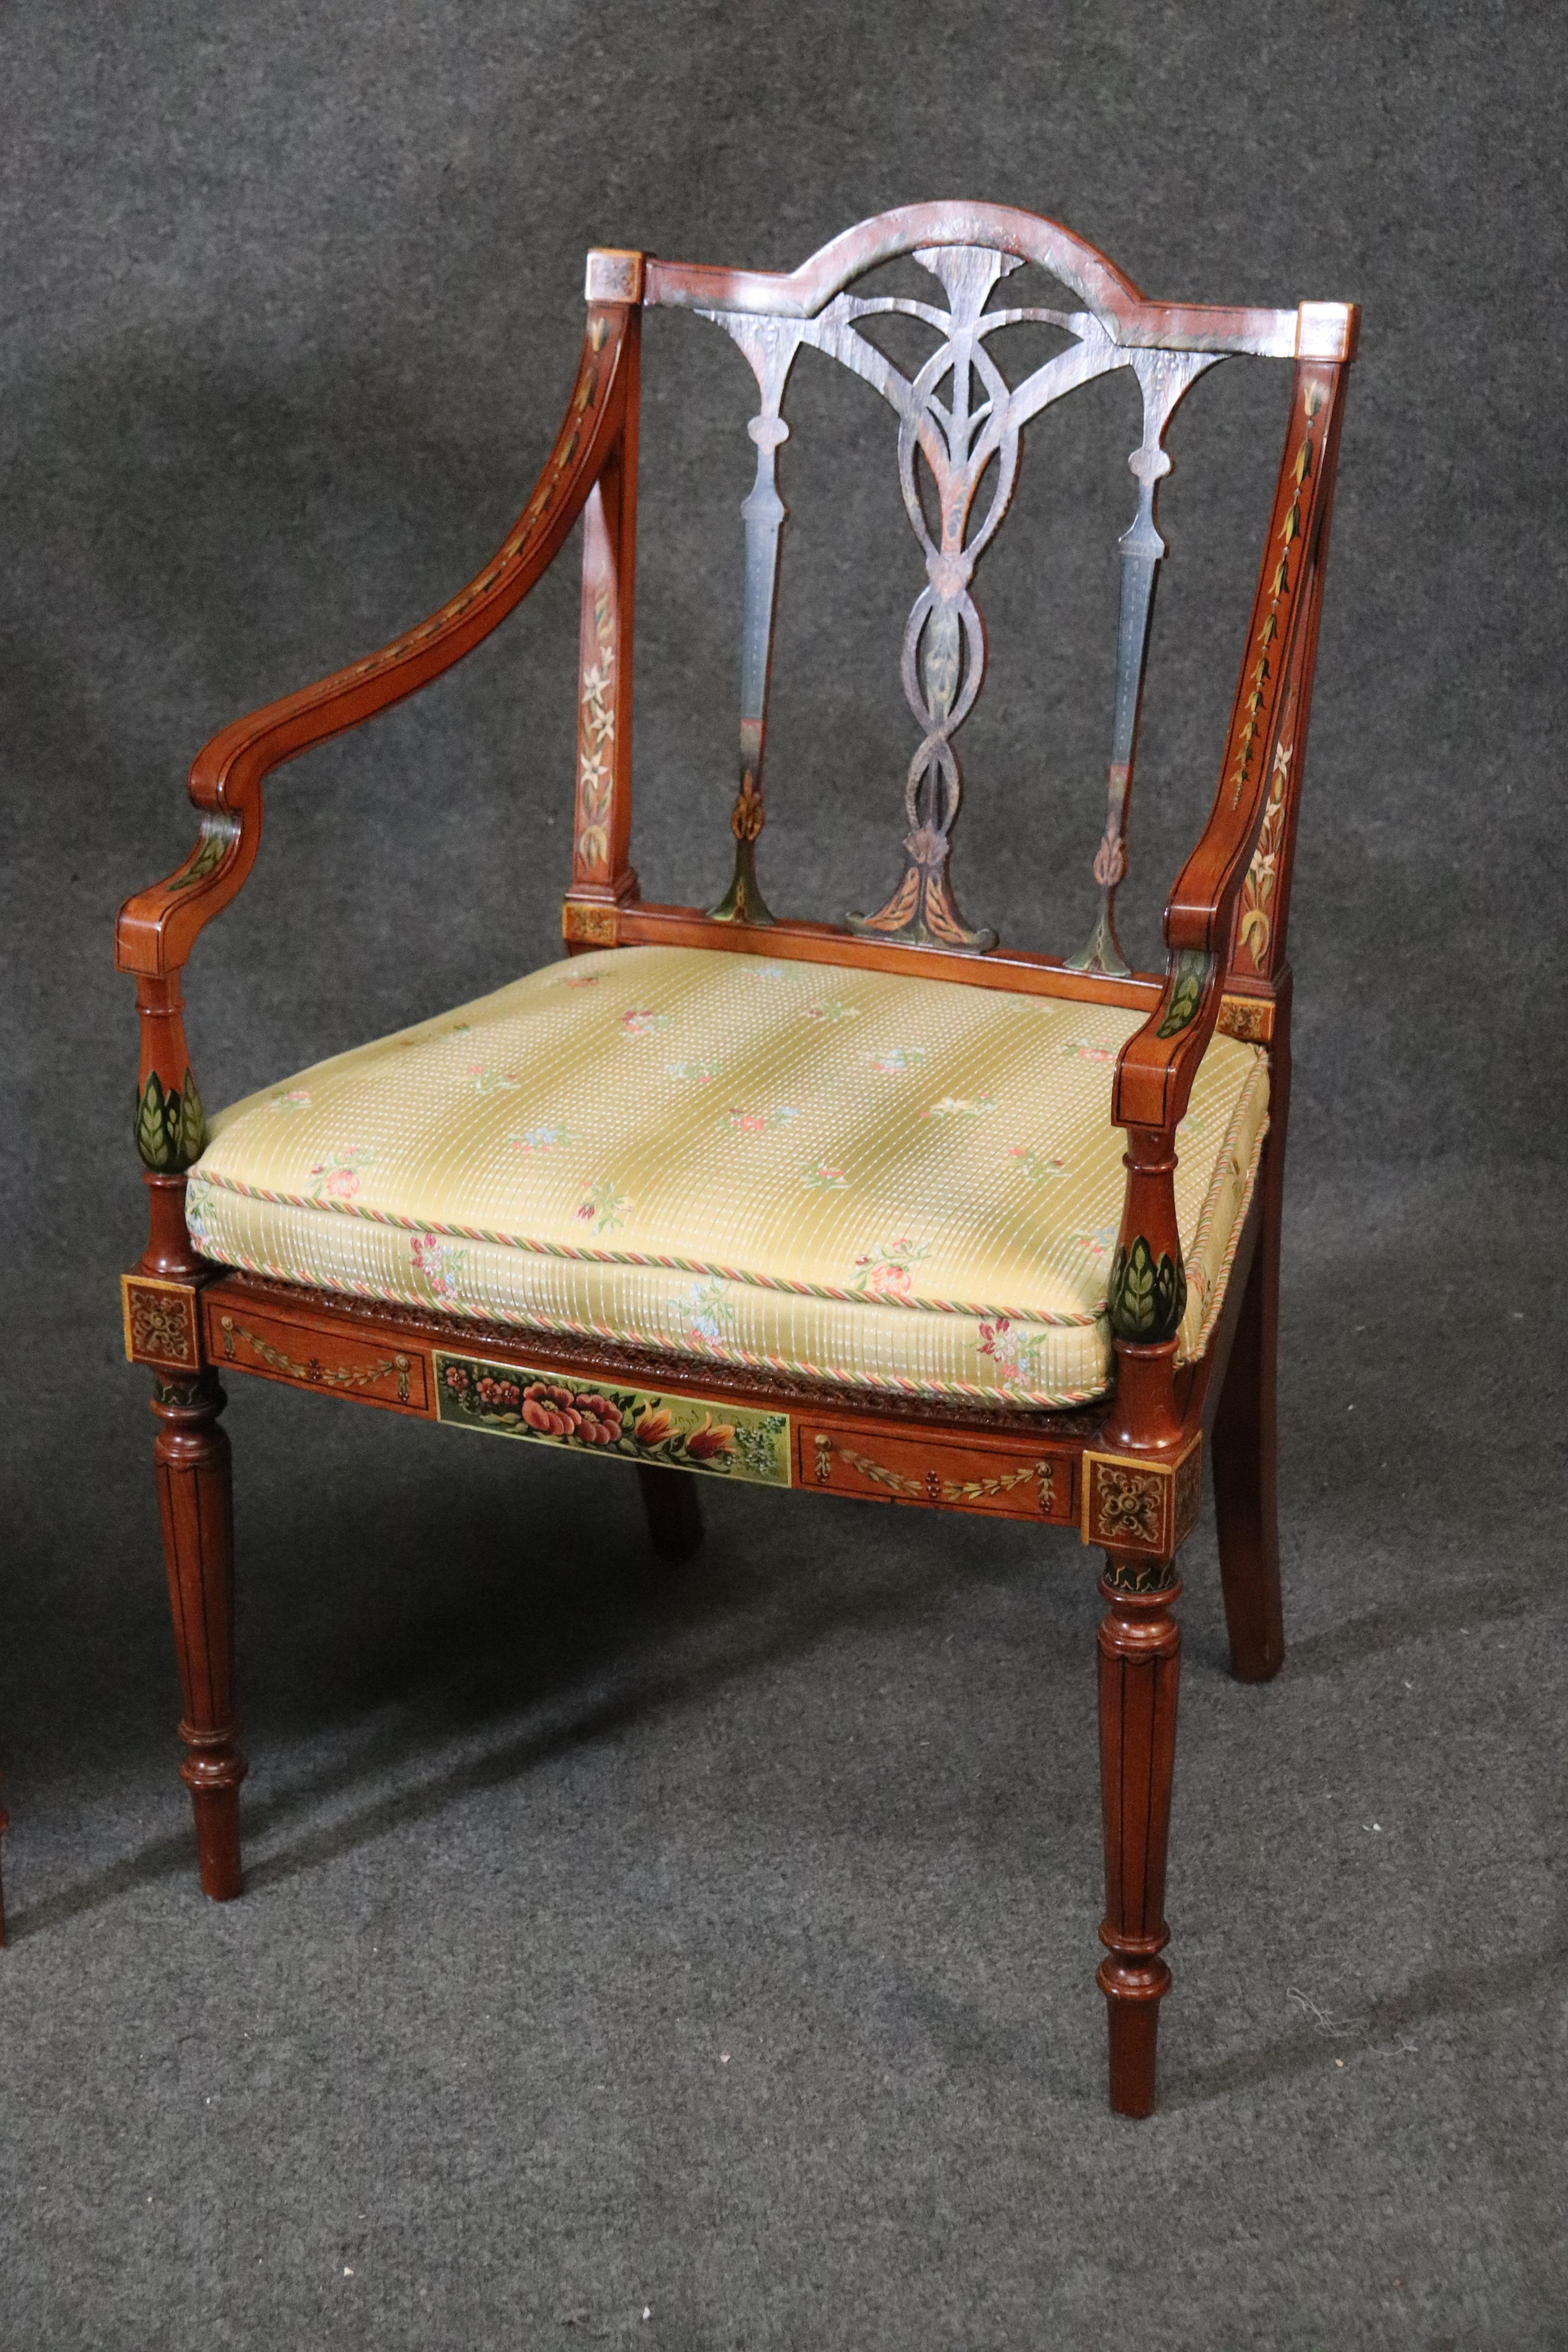 These gorgeous chairs measure: 37 inches tall x 25 inches wide x 22 deep and the seat height is 20 inches. These chairs are in good condition and feature painted snakes and other beautiful designs. The cane seats are very clean and free of damage.